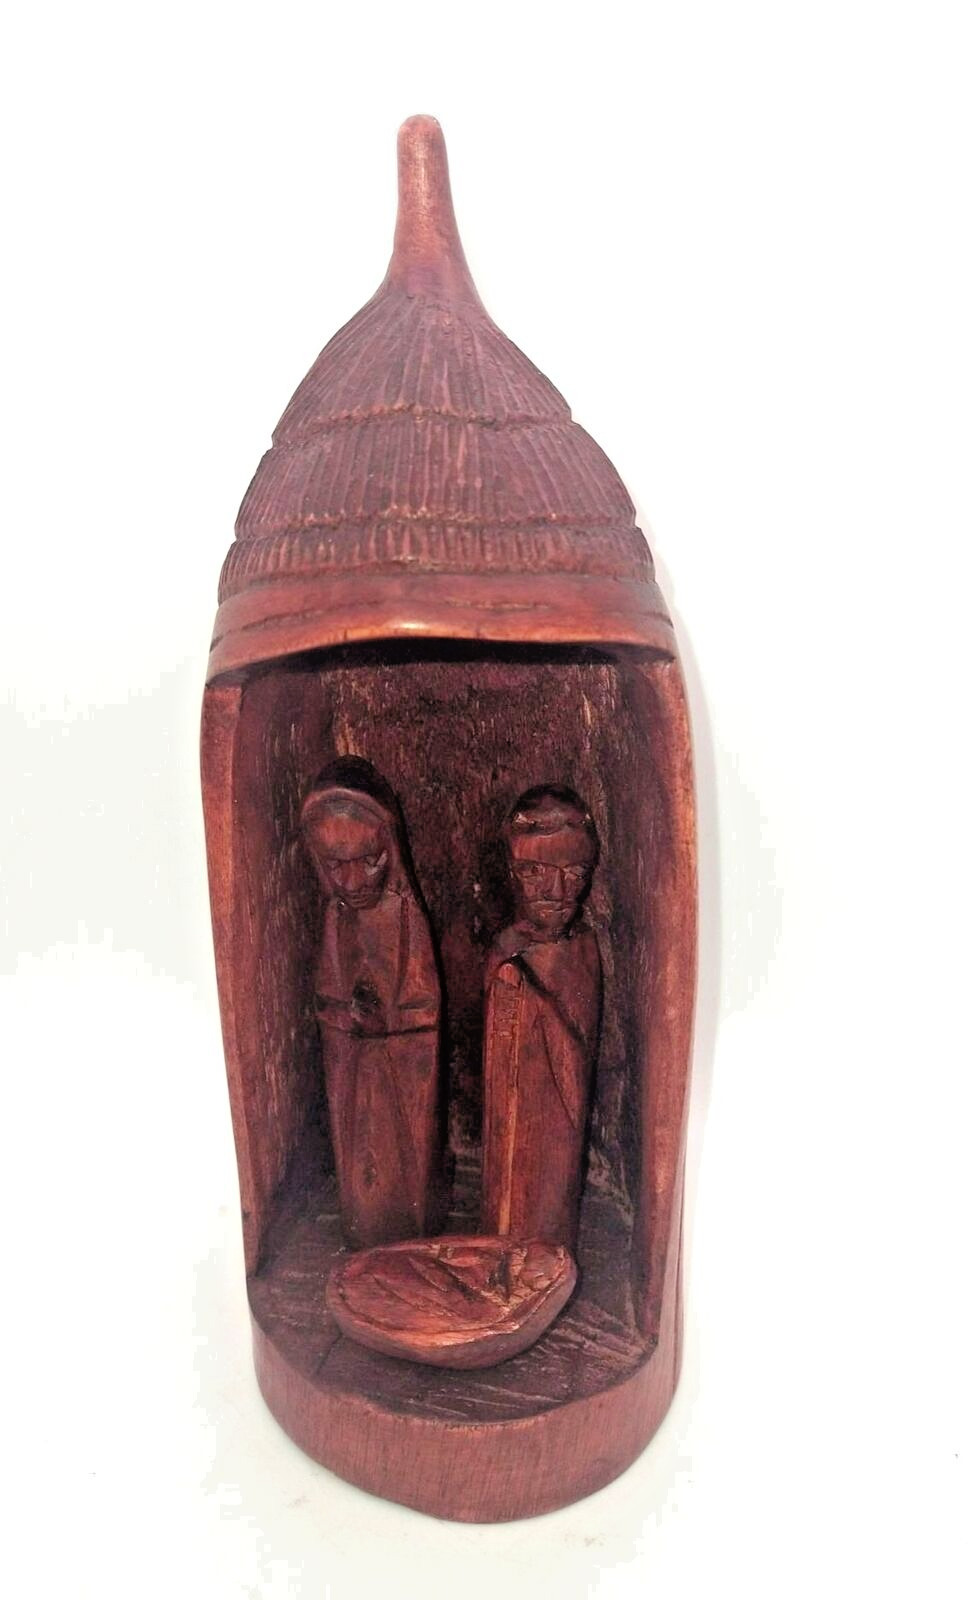 Vintage Hand Carved African Wood Nativity One-Piece Joseph Mary Baby Jesus From